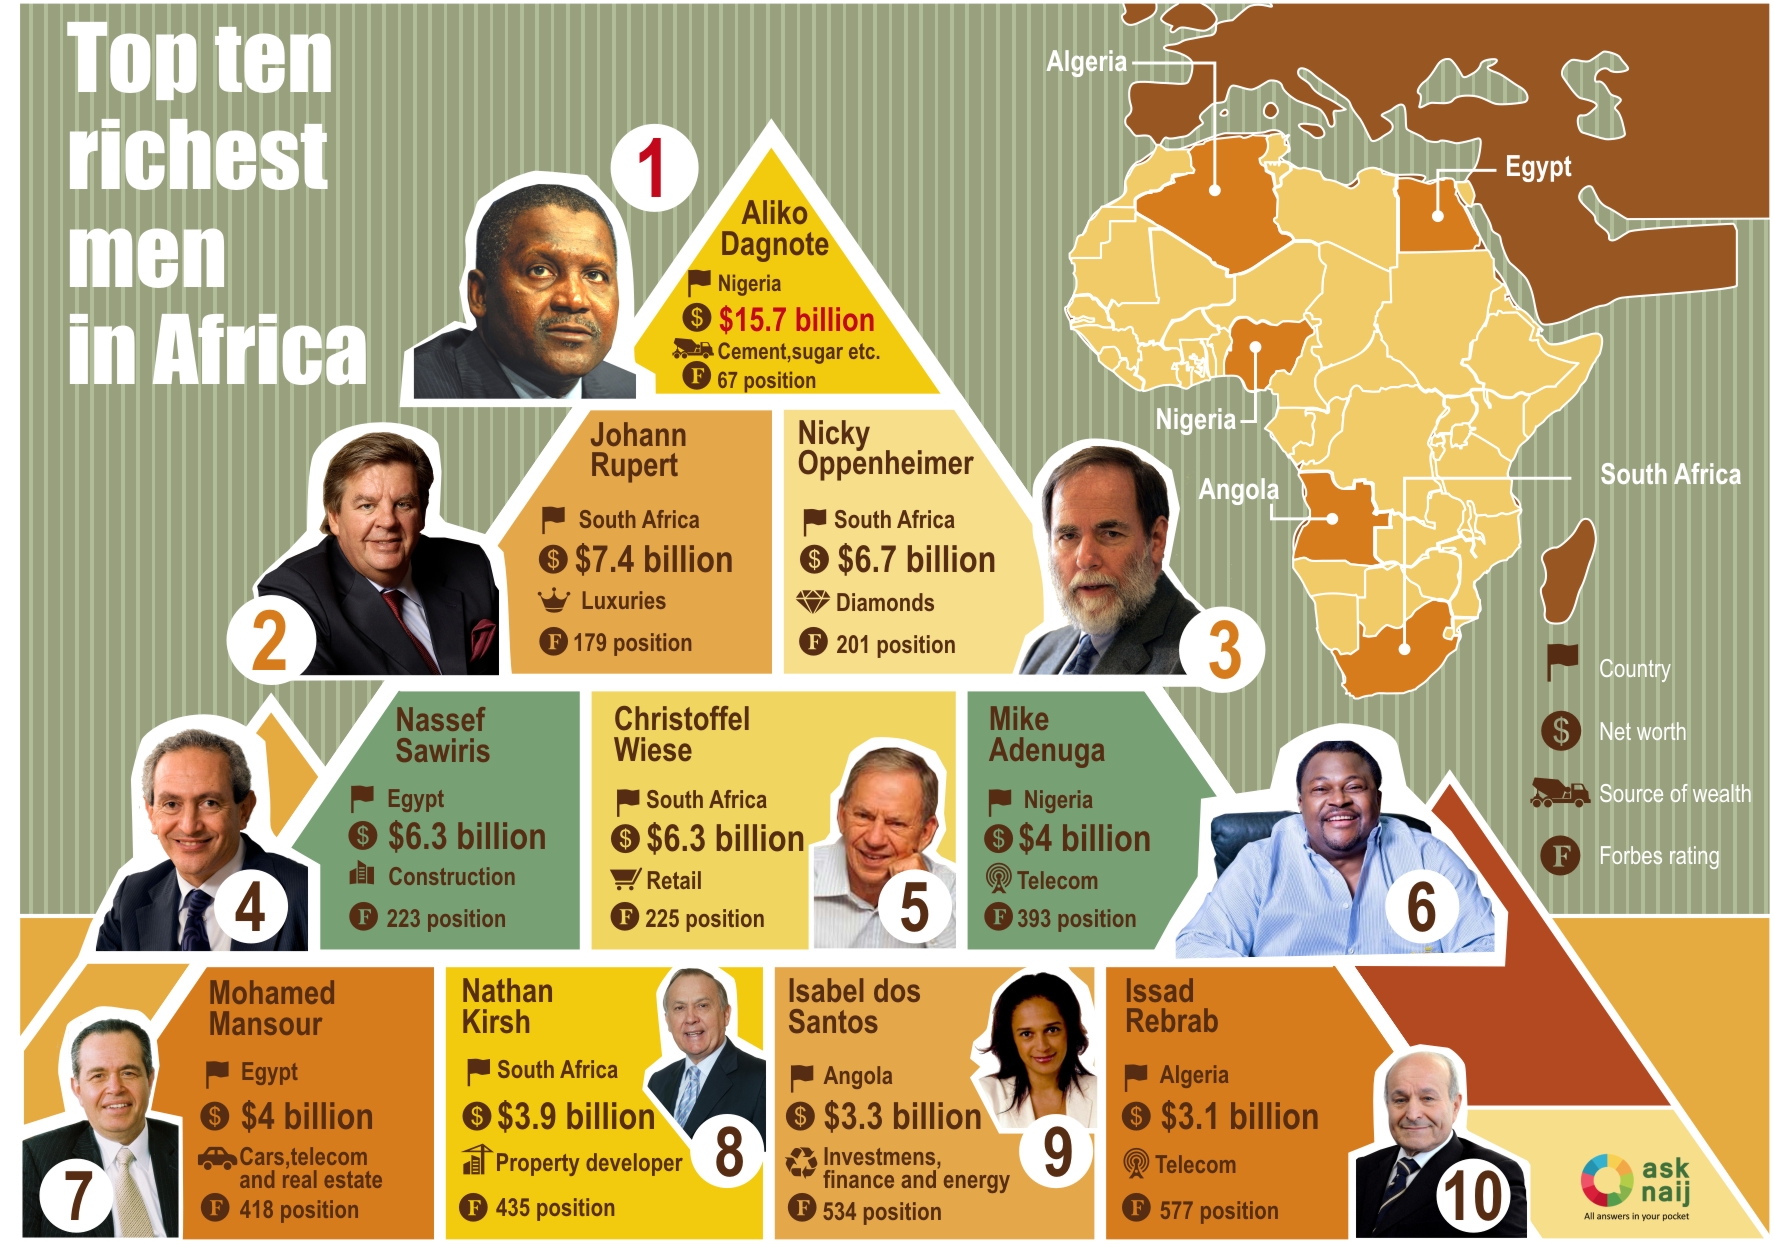 TOP 10 Richest Men in Africa Visual.ly